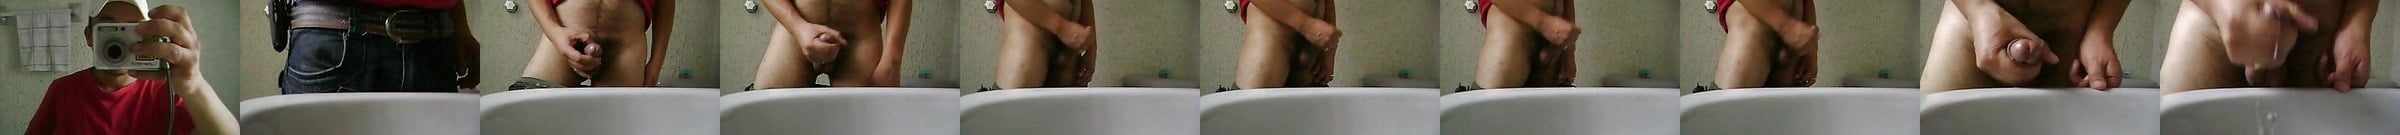 Featured Metro Gay Porn Videos 3 Xhamster